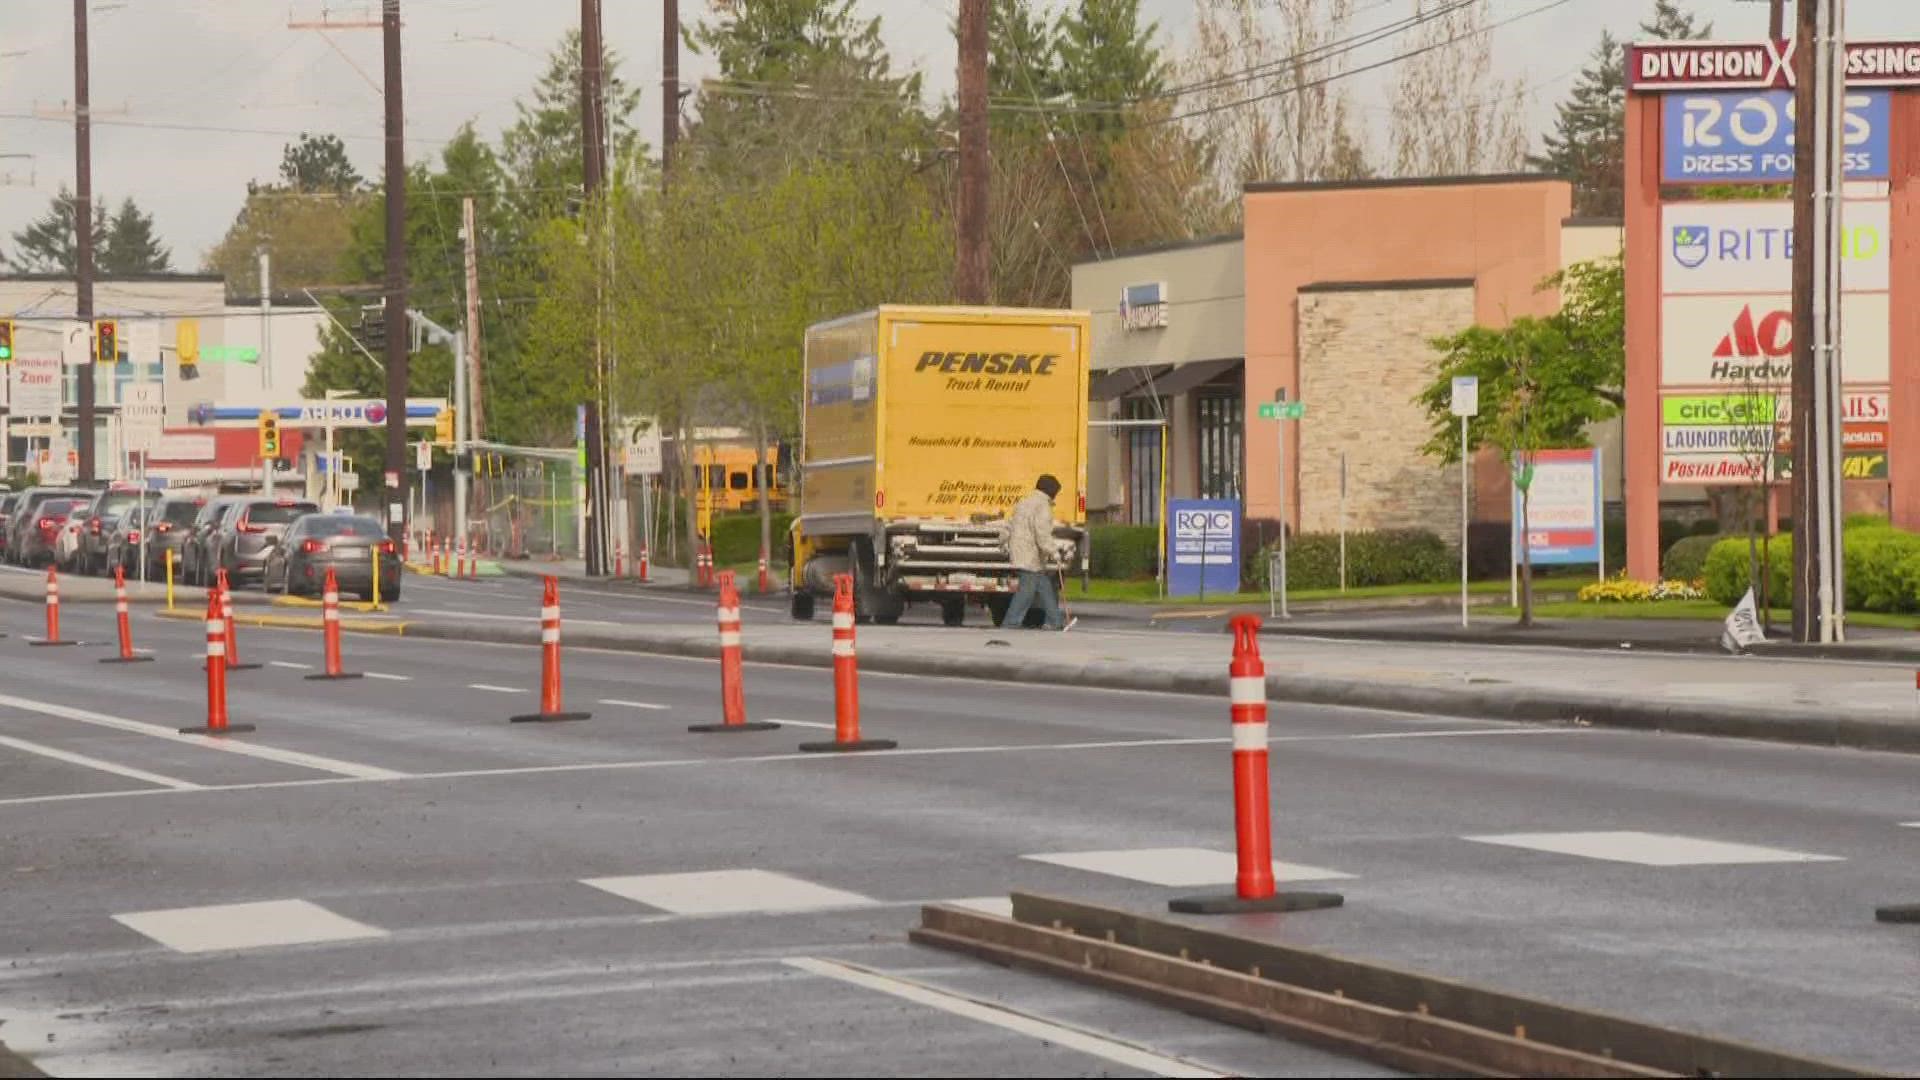 Construction work continues on a series of safety upgrades to outer Division Street in East Portland. Neighbors weigh in on the project.